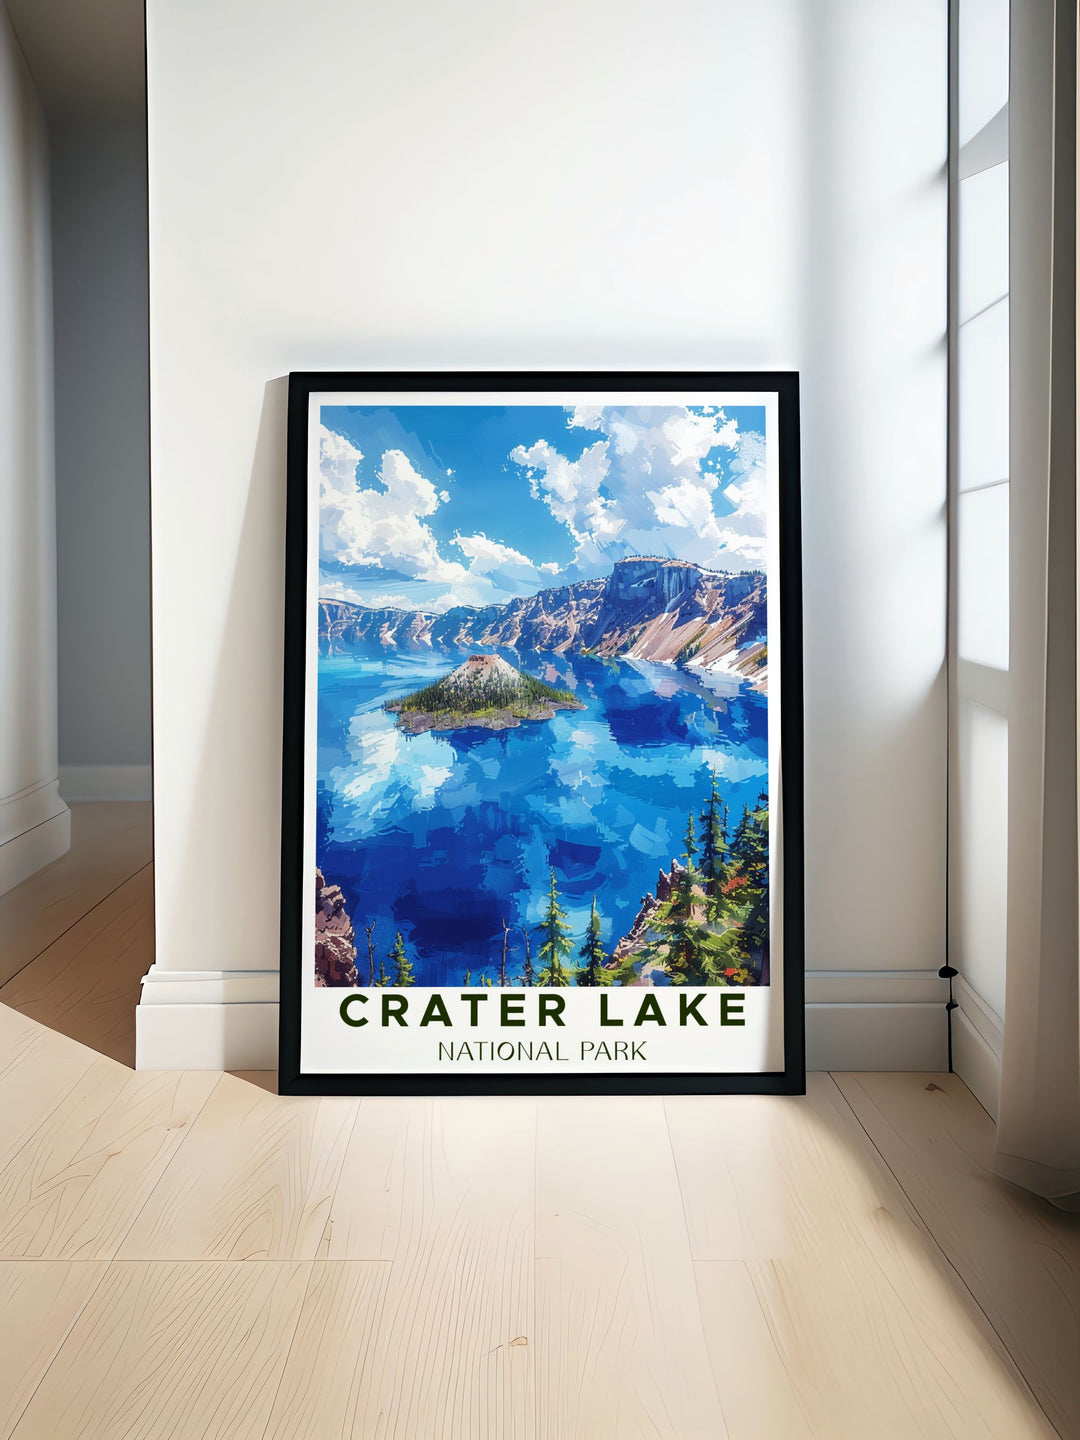 Beautiful Crater Lake art showcasing the stunning caldera and deep blue waters perfect for enhancing home decor with a touch of nature. High quality National Park prints that capture the essence of Crater Lake bringing its natural beauty into any living space.